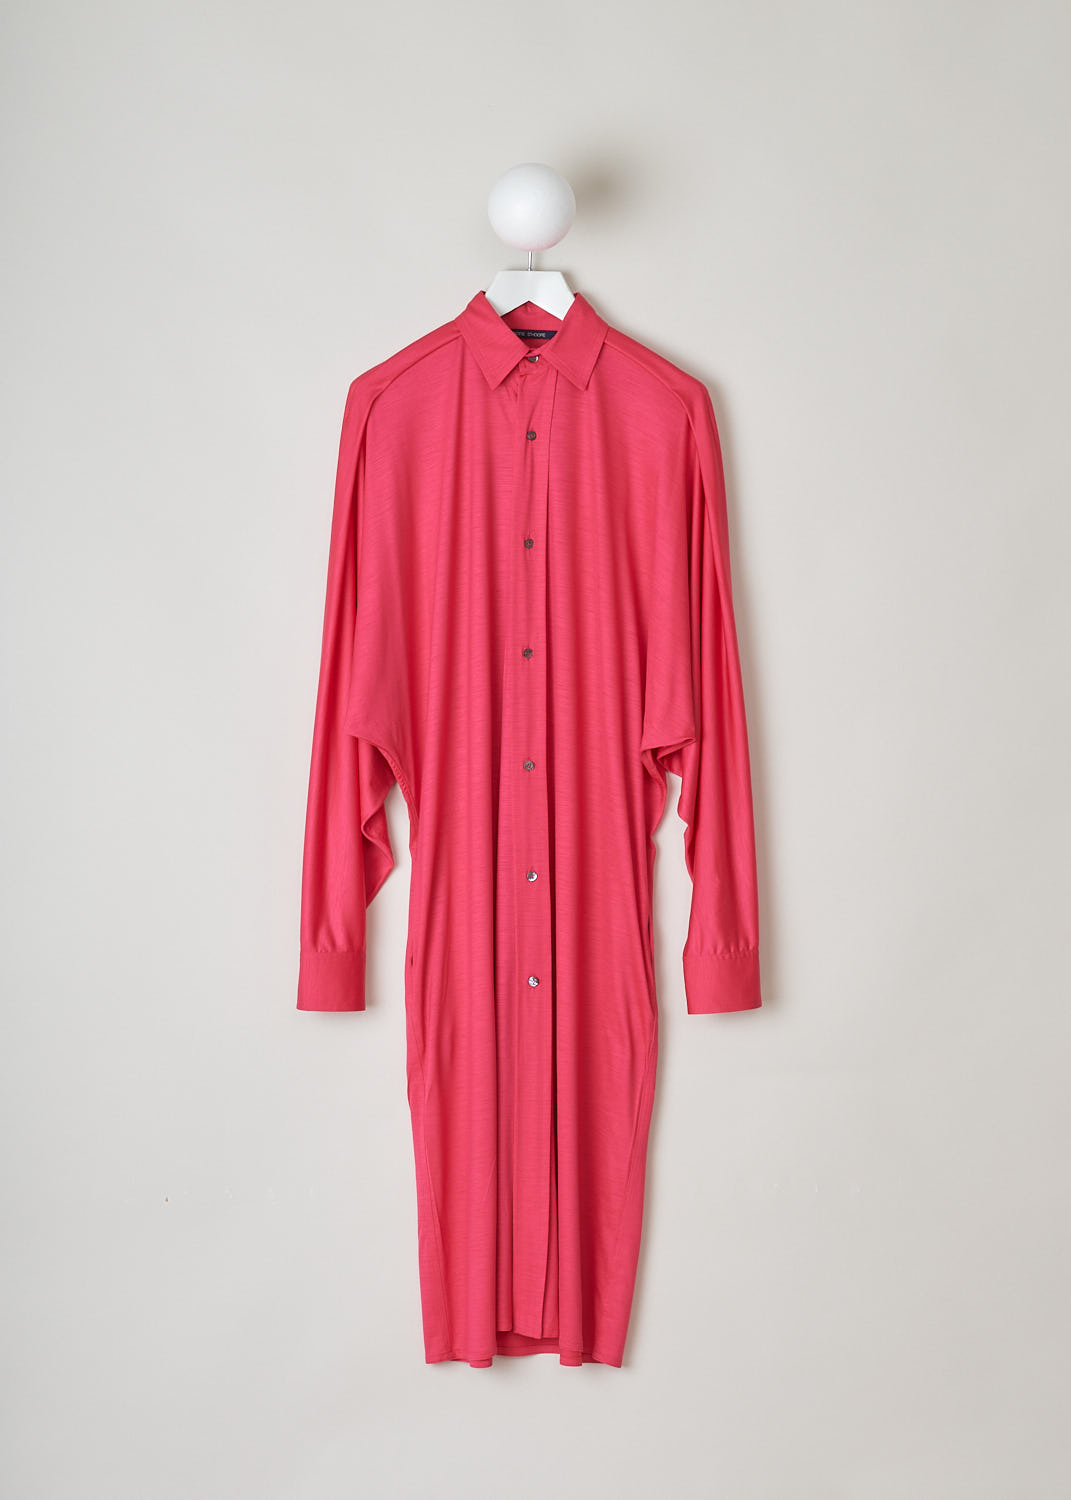 SOFIE Dâ€™HOORE, FUCHSIA COLORED SHIRT DRESS, DUMAS_WOJE_FUCHSIA, Pink, Front, This mid-length fuchsia shirt dress features a classic collar, front button closure and dolman sleeves with buttoned cuffs. Side pockets can be found concealed in the seam.
